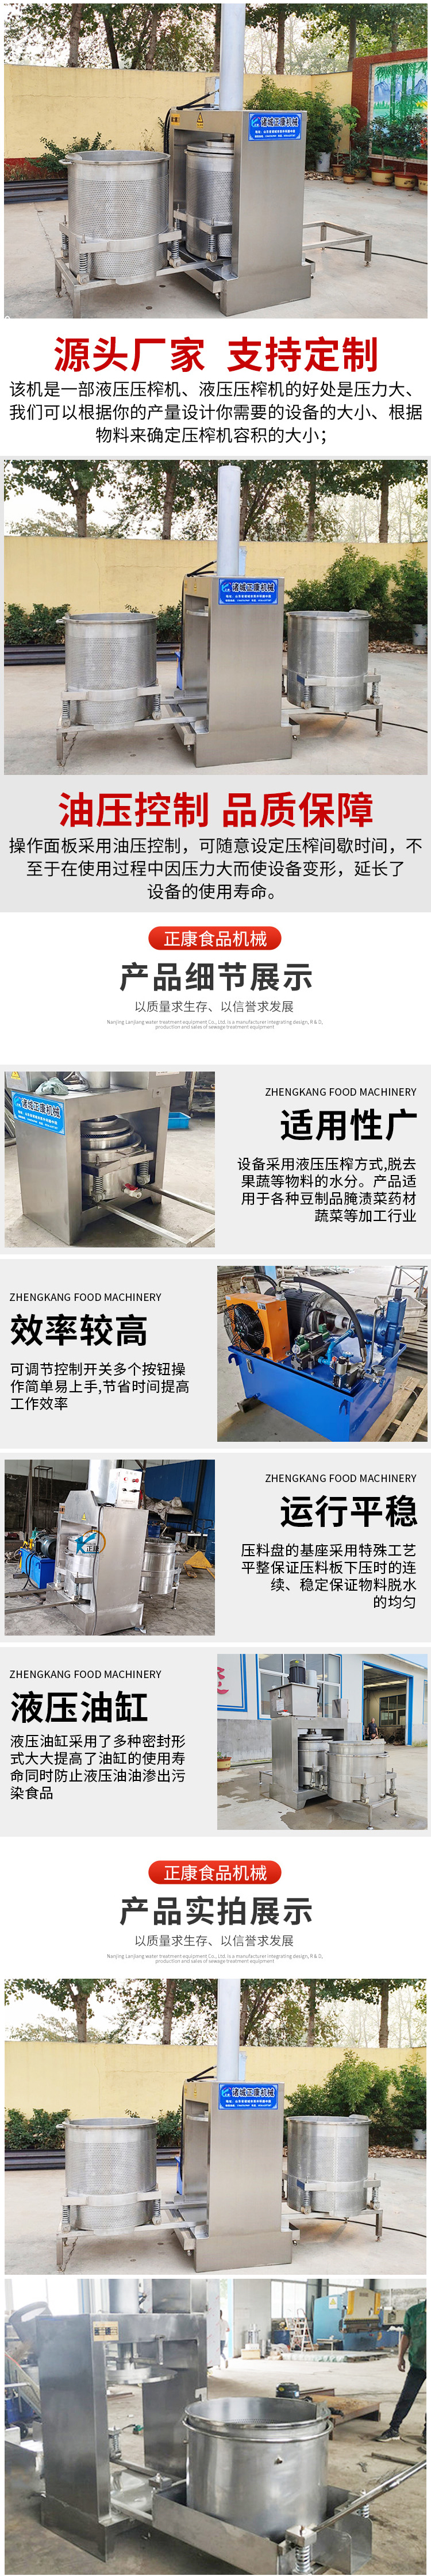 Press machine, plunger type hydraulic juicer for fruits and vegetables, high juice yield of traditional Chinese medicine residue dehydration and squeezing equipment